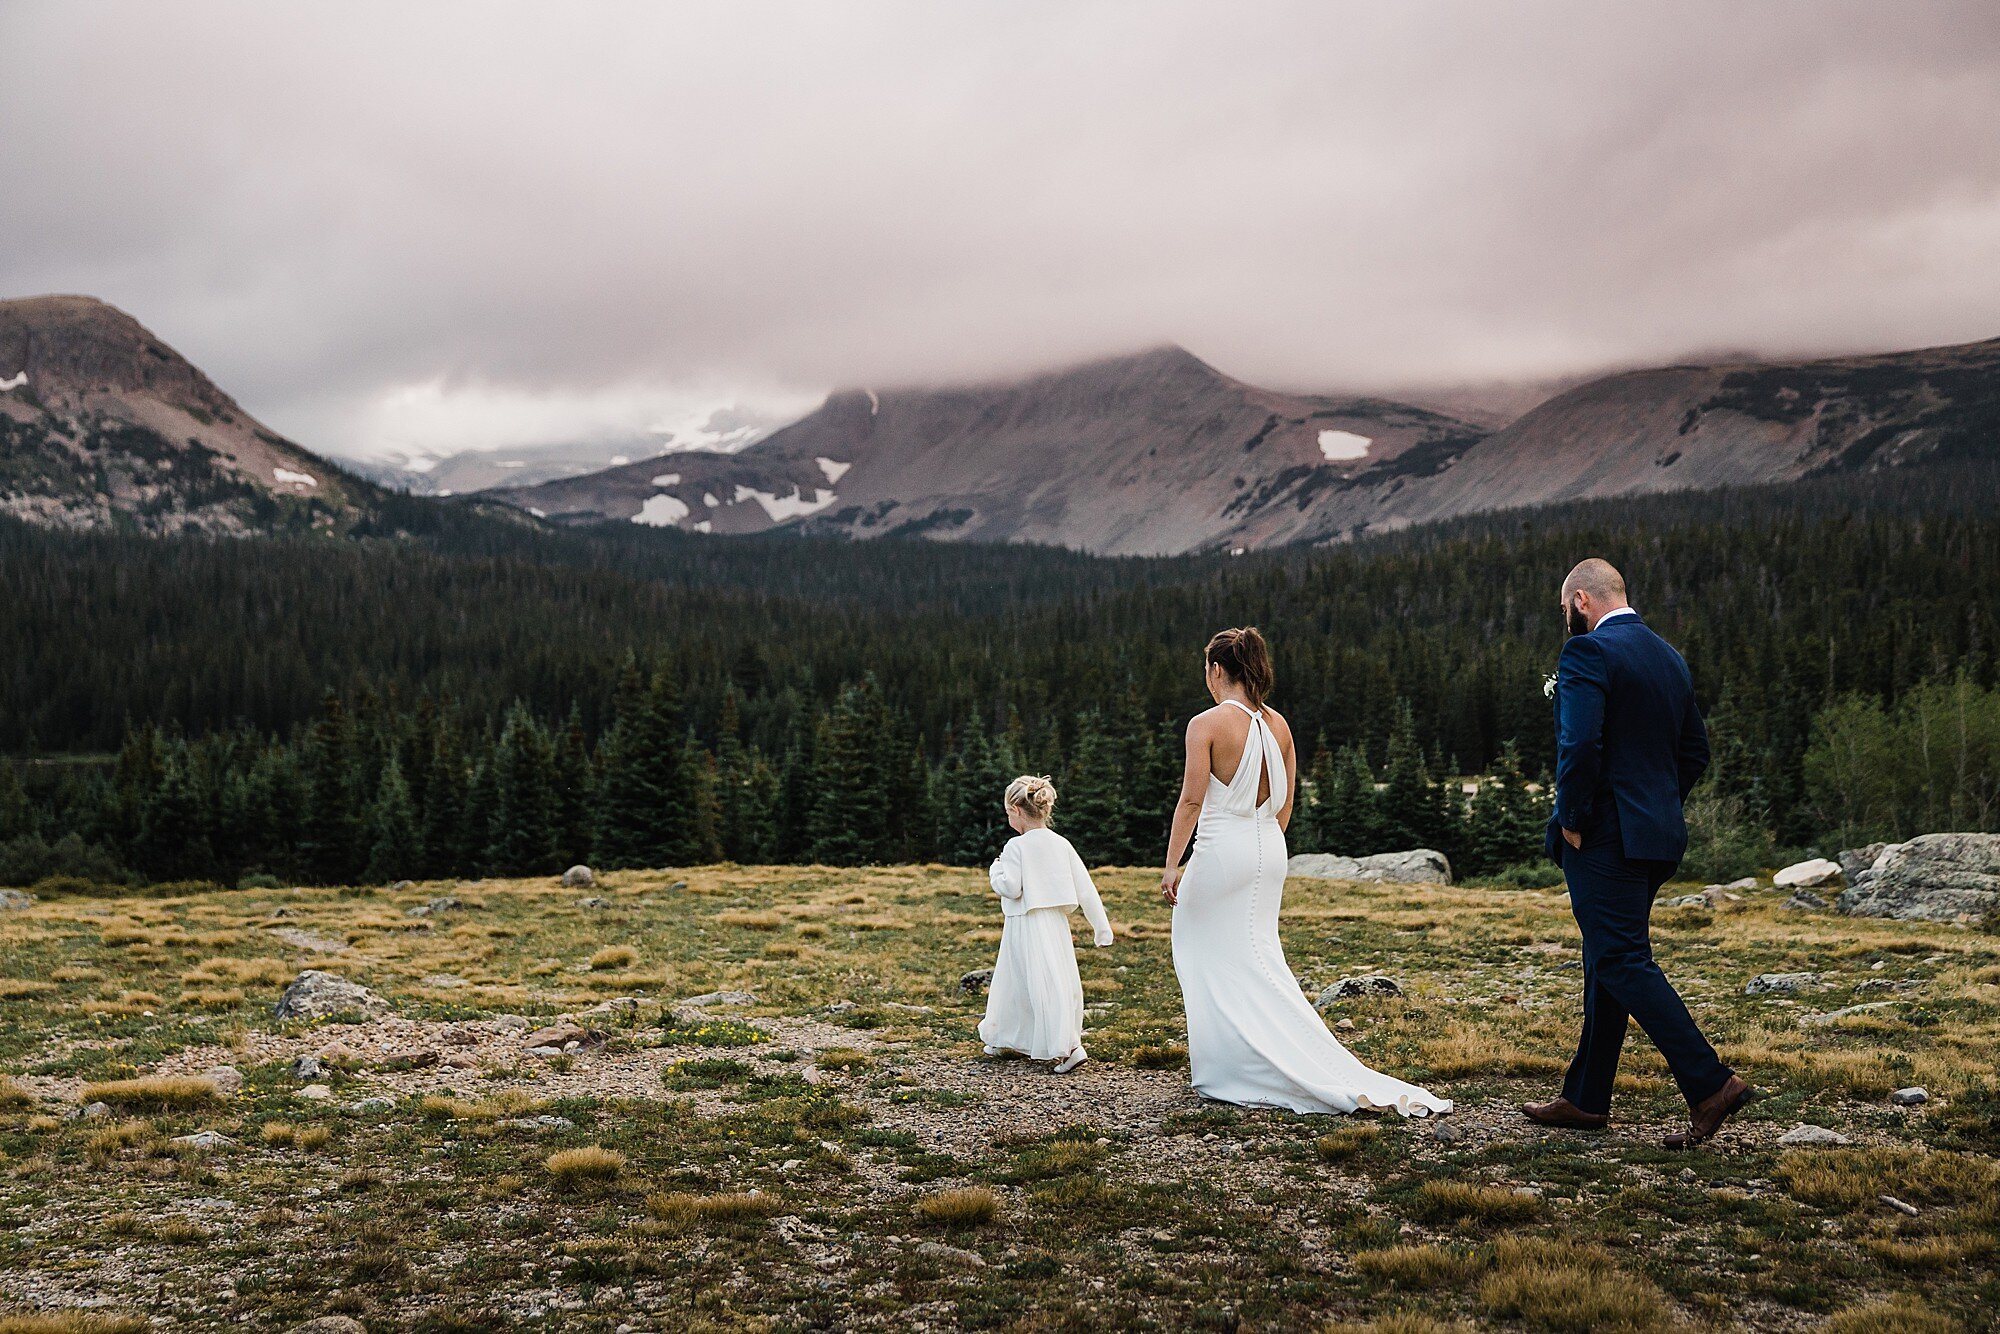 Colorado Mountain Elopement at an Alpine Lake | Vow of the Wild